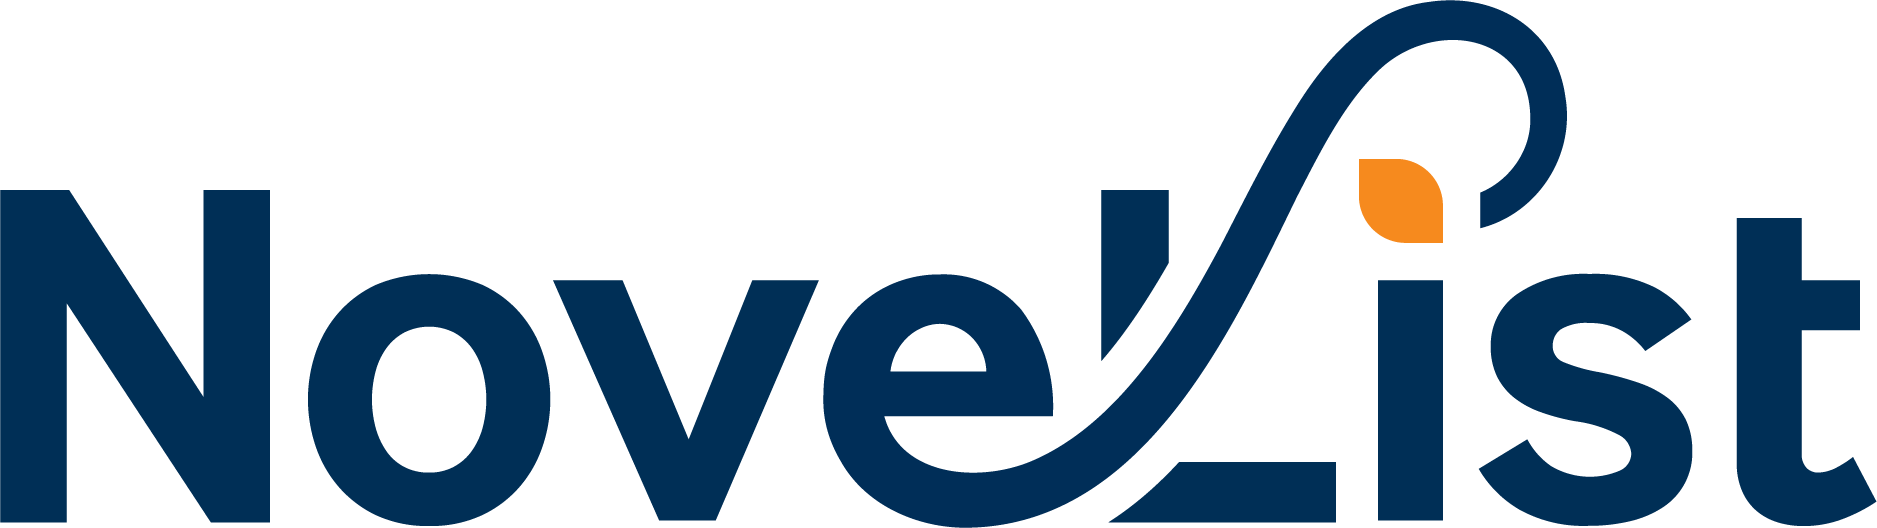 The NoveList logo, featuring stylized text spelling the company name. The dot over the letter I is shaped like a leaf.